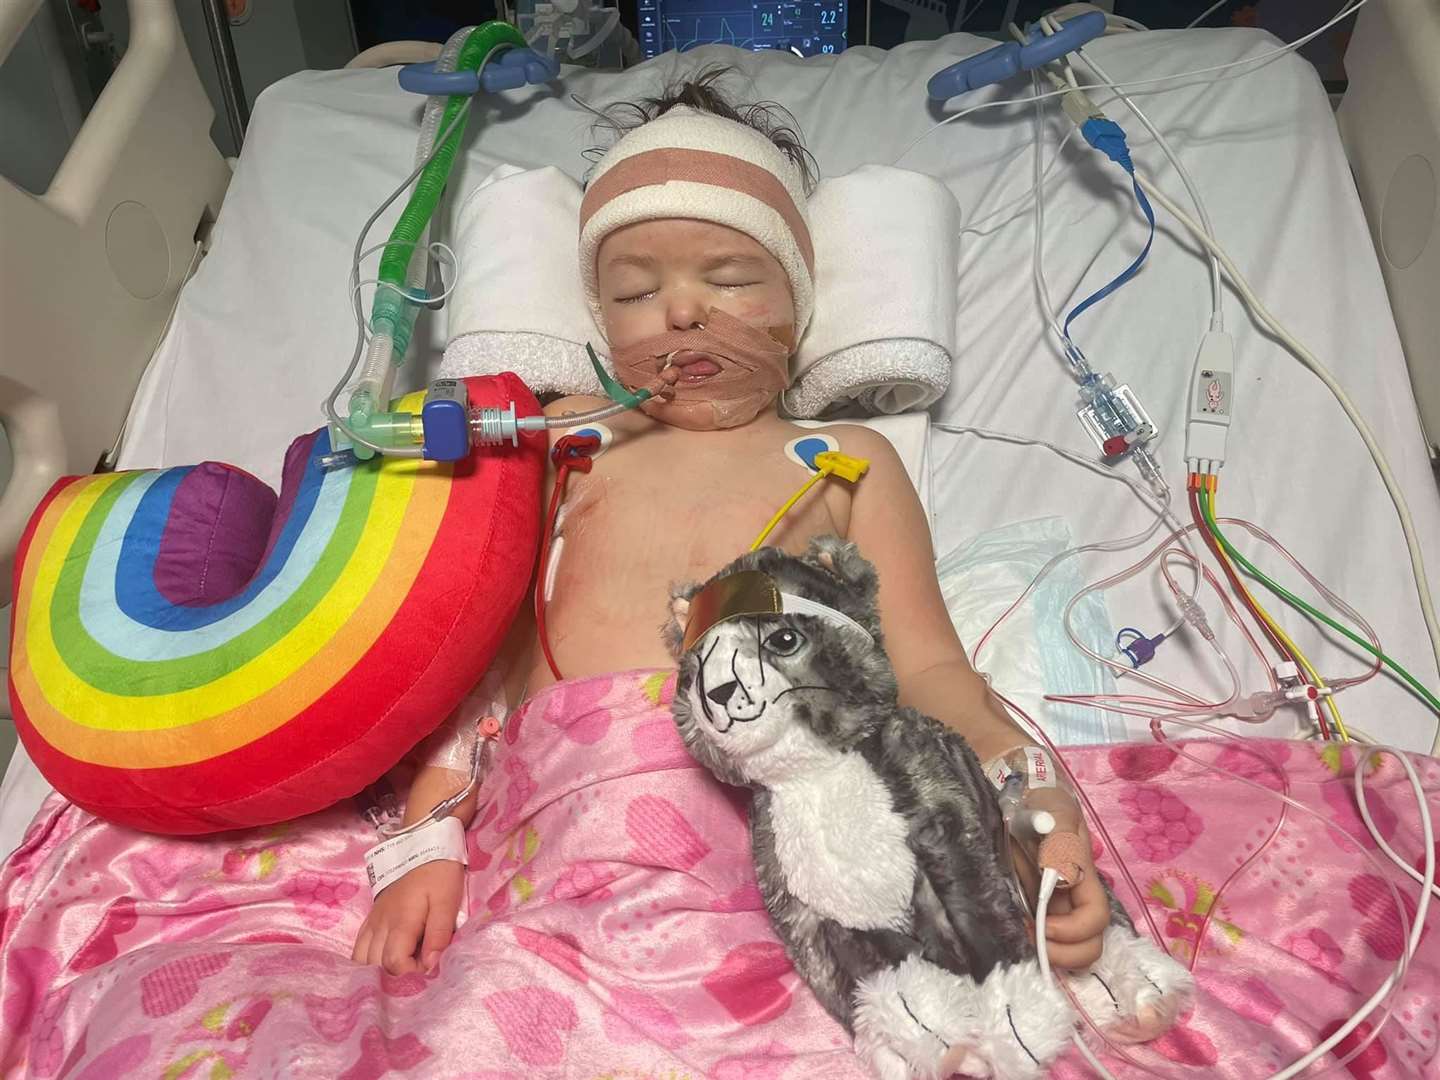 Izzy has been placed on a ventilator for support. Photo: Isobel's Army Facebook Page